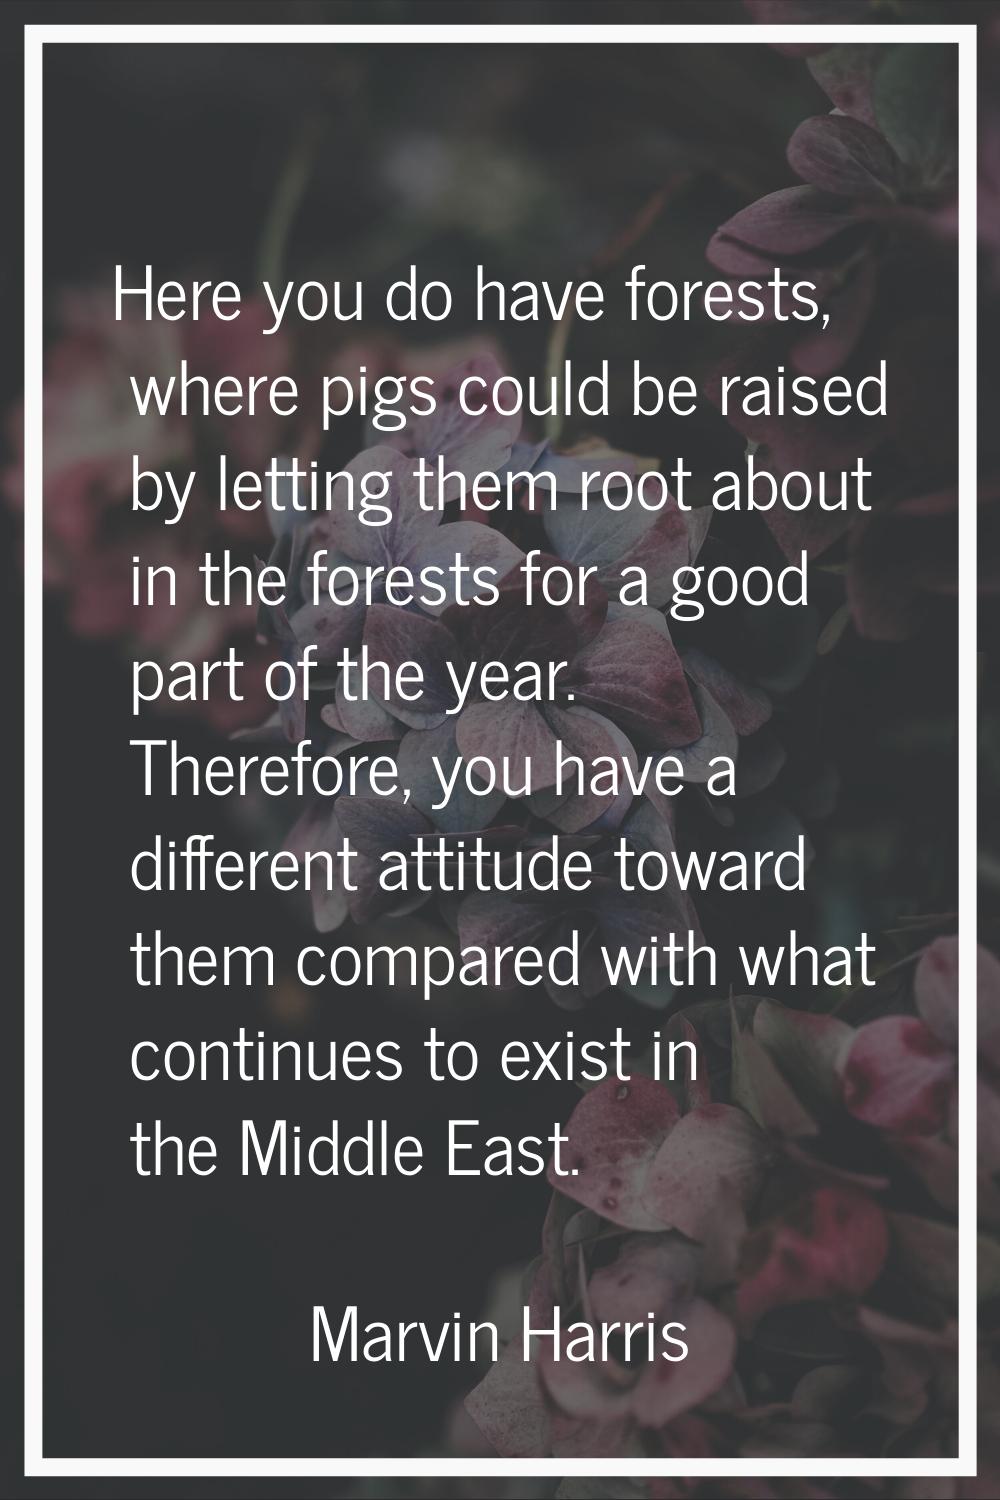 Here you do have forests, where pigs could be raised by letting them root about in the forests for 